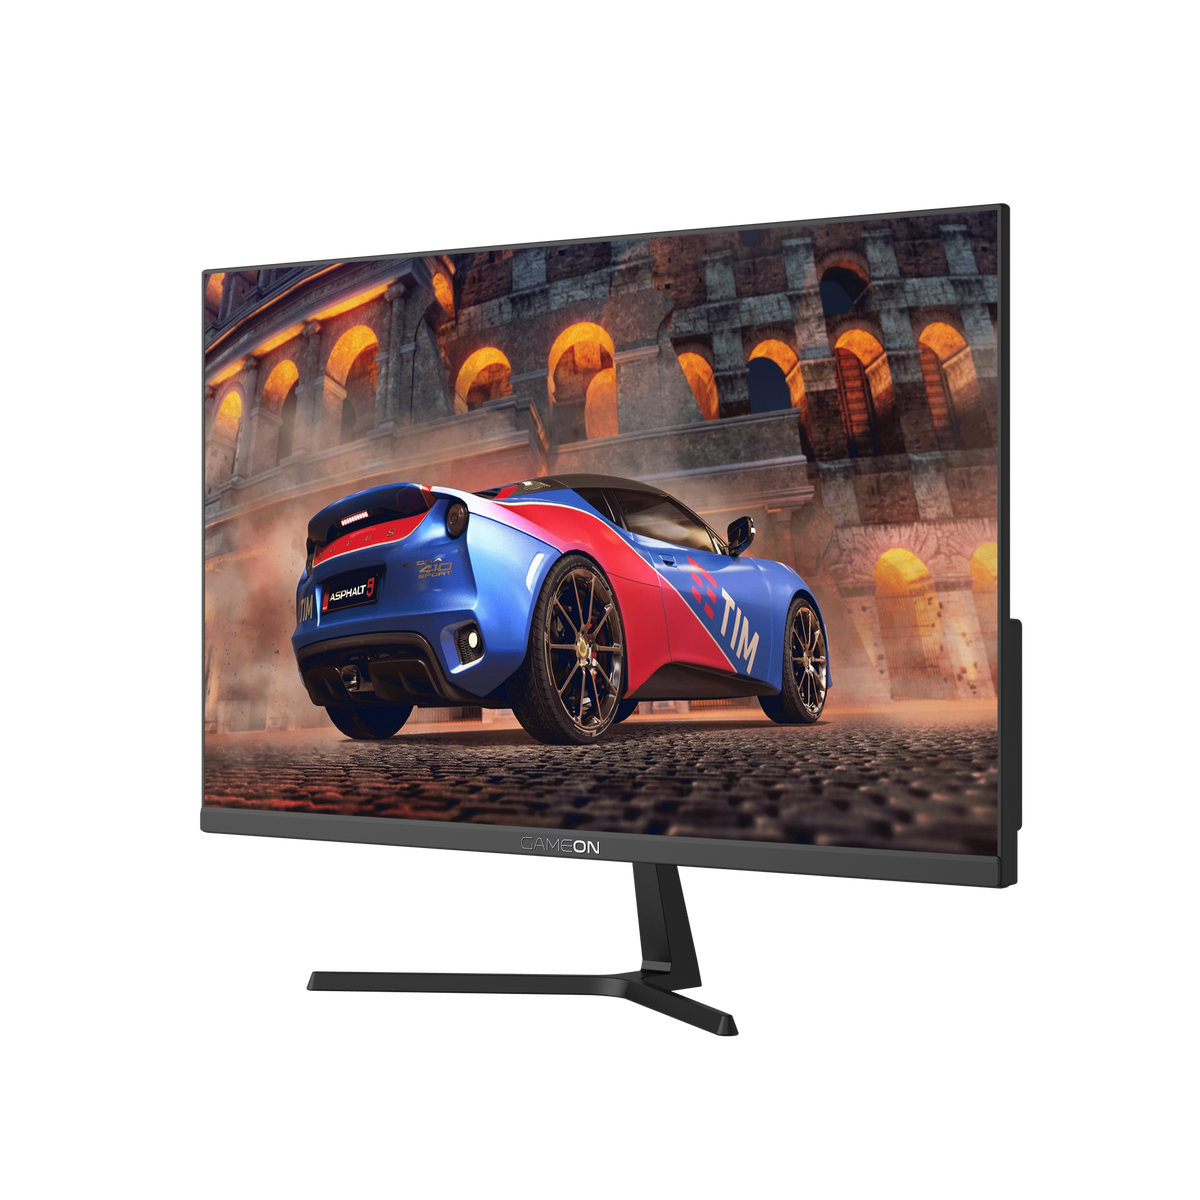 GAMEON GOPS24180IPS 24" FHD, 180Hz, 0.5 ms, HDMI 2.0 Gaming Monitor (Adaptive Sync and G-Sync Compatible) Fast IPS